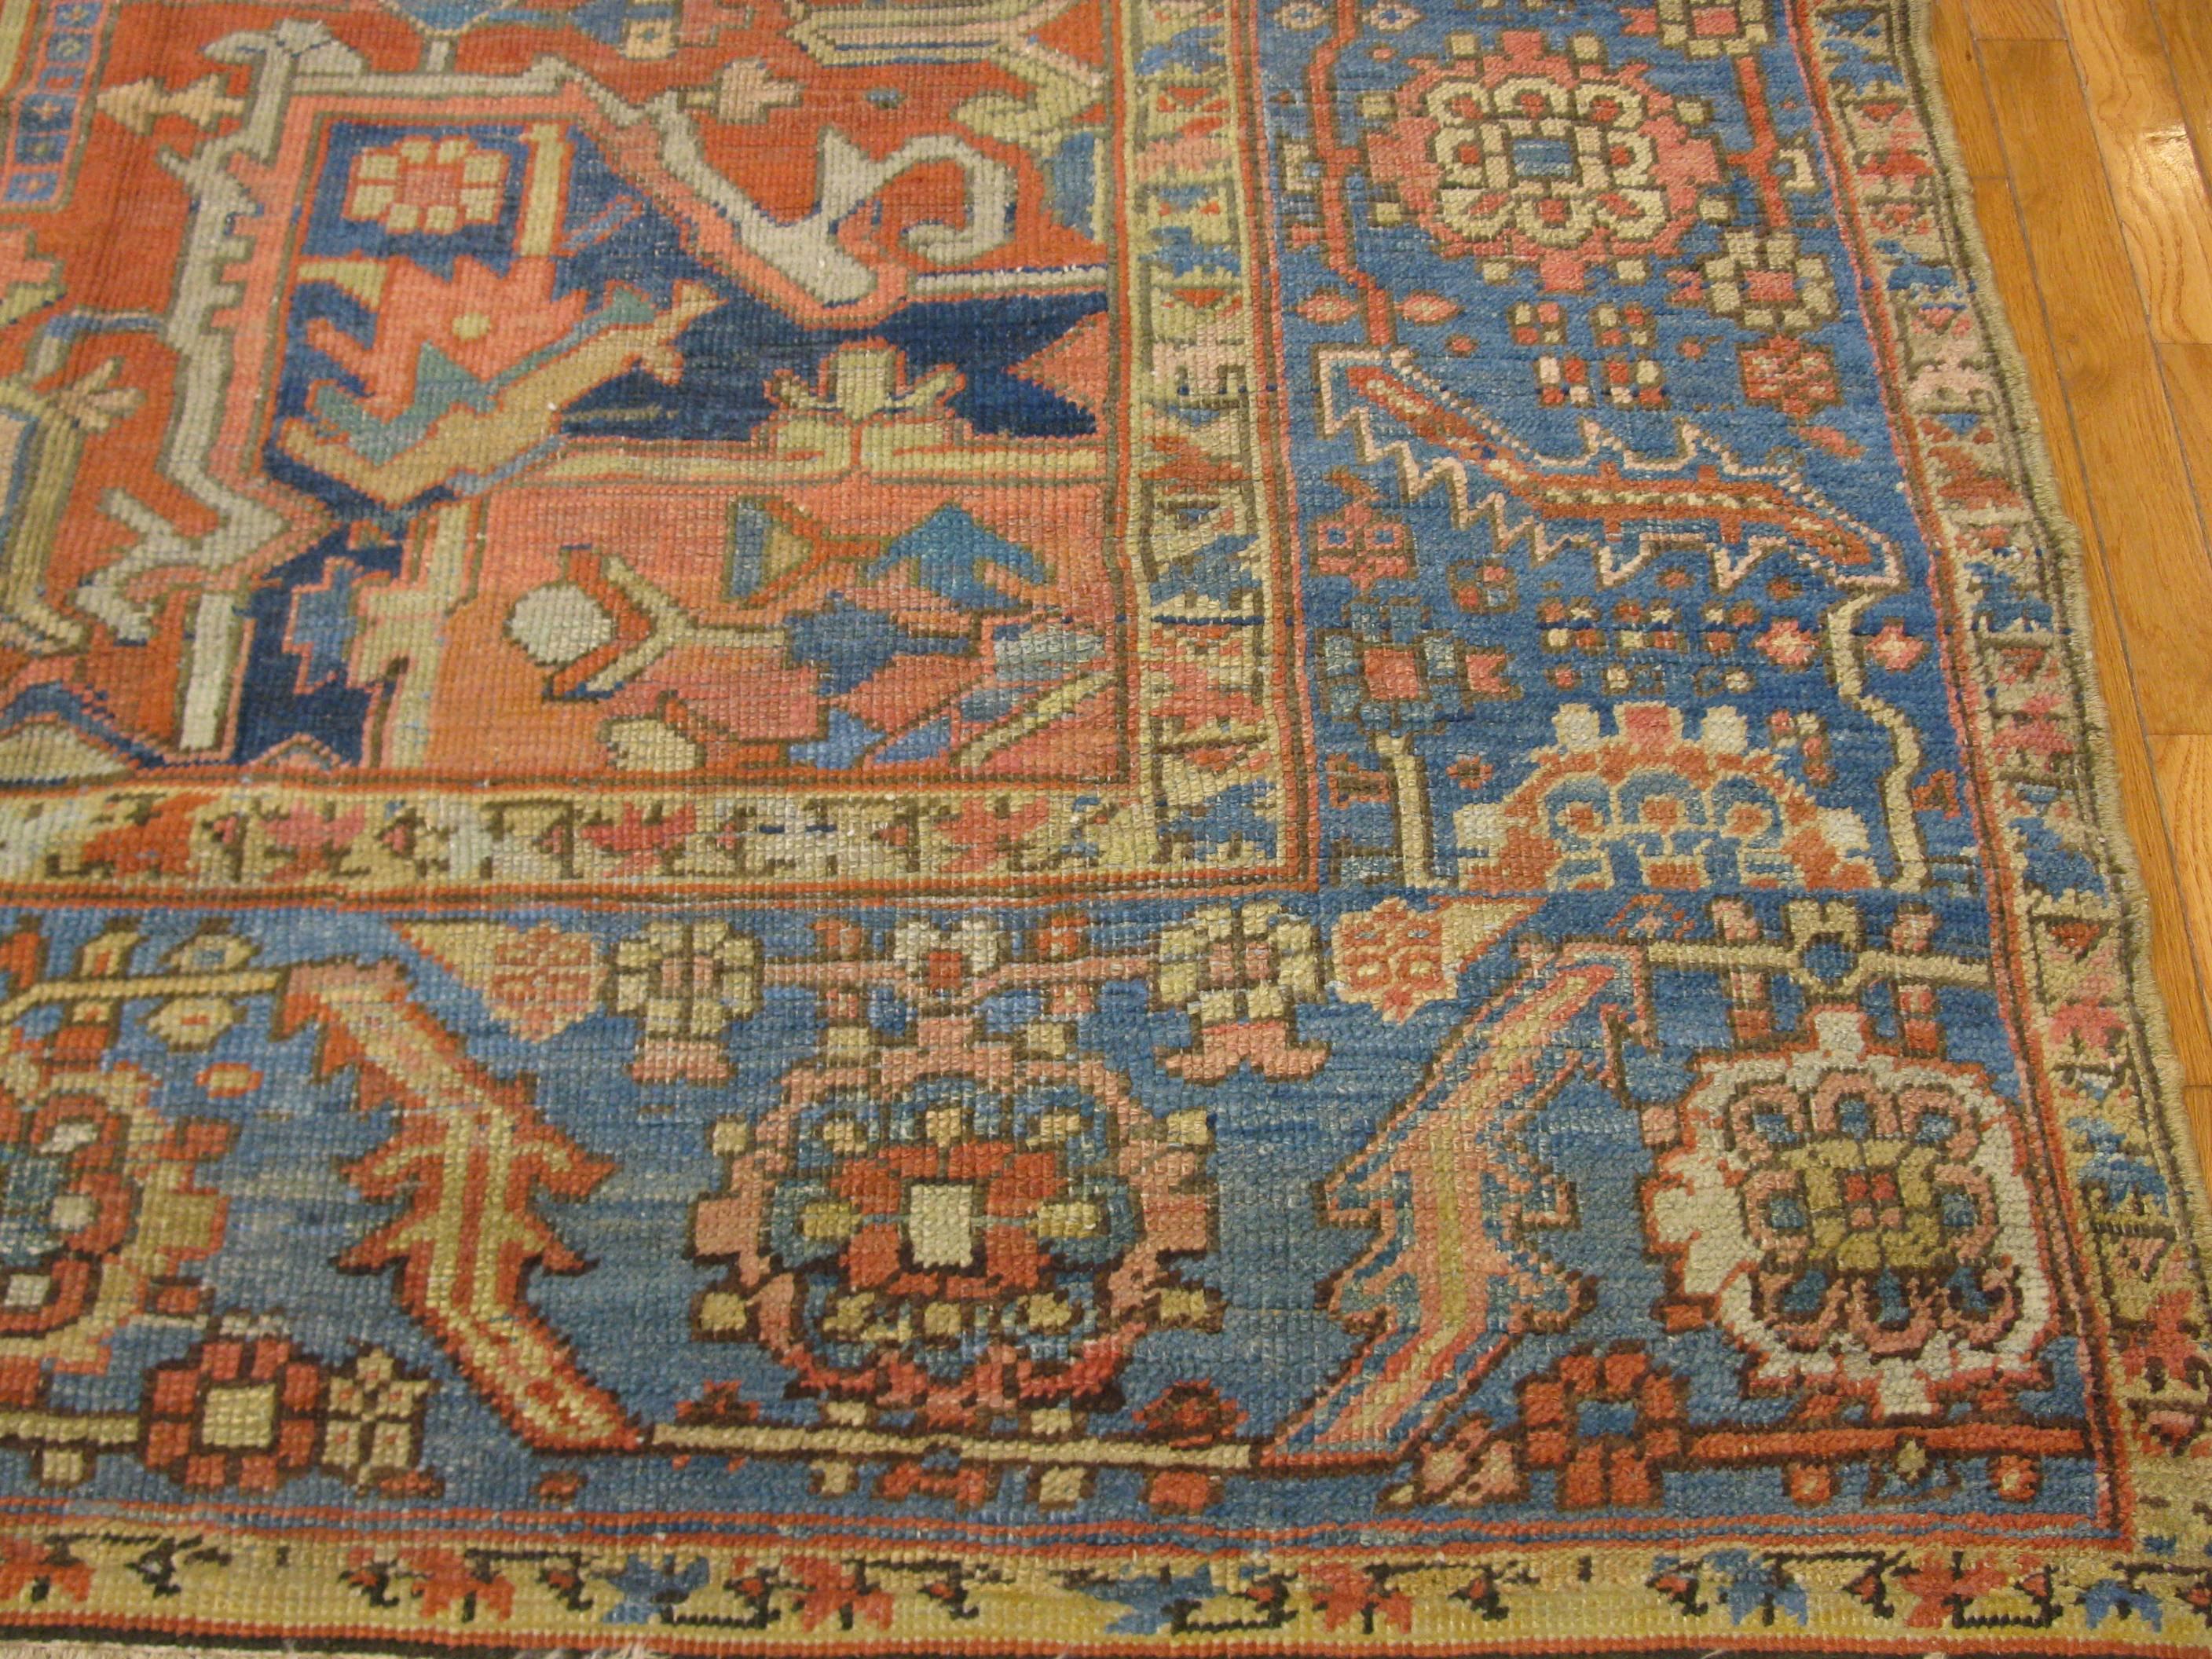 Antique Hand-Knotted Wool Blue Persian Heriz Rug In Good Condition For Sale In Atlanta, GA